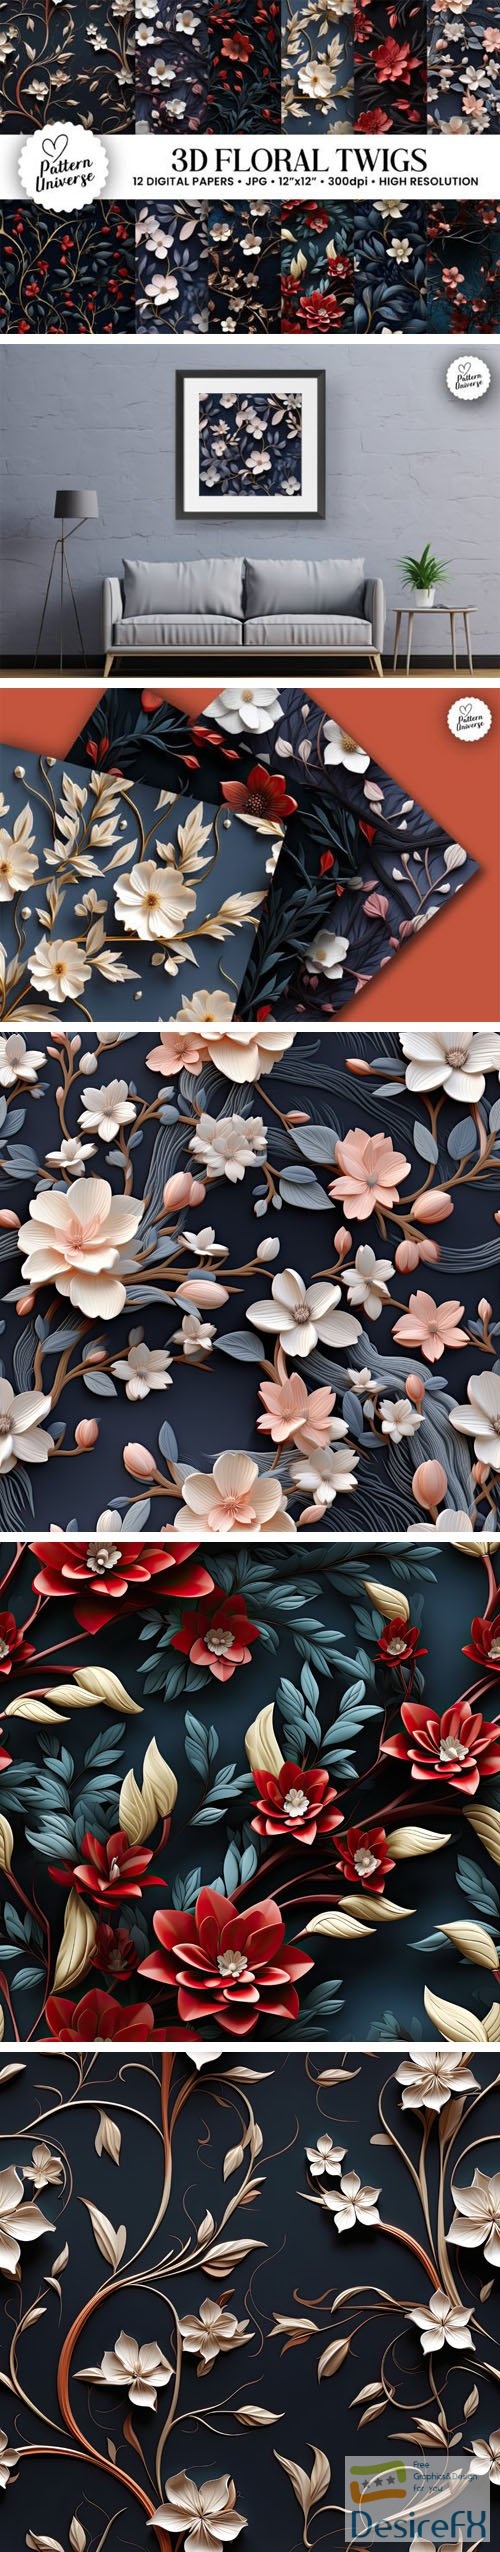 3D Floral Twigs Seamless Patterns